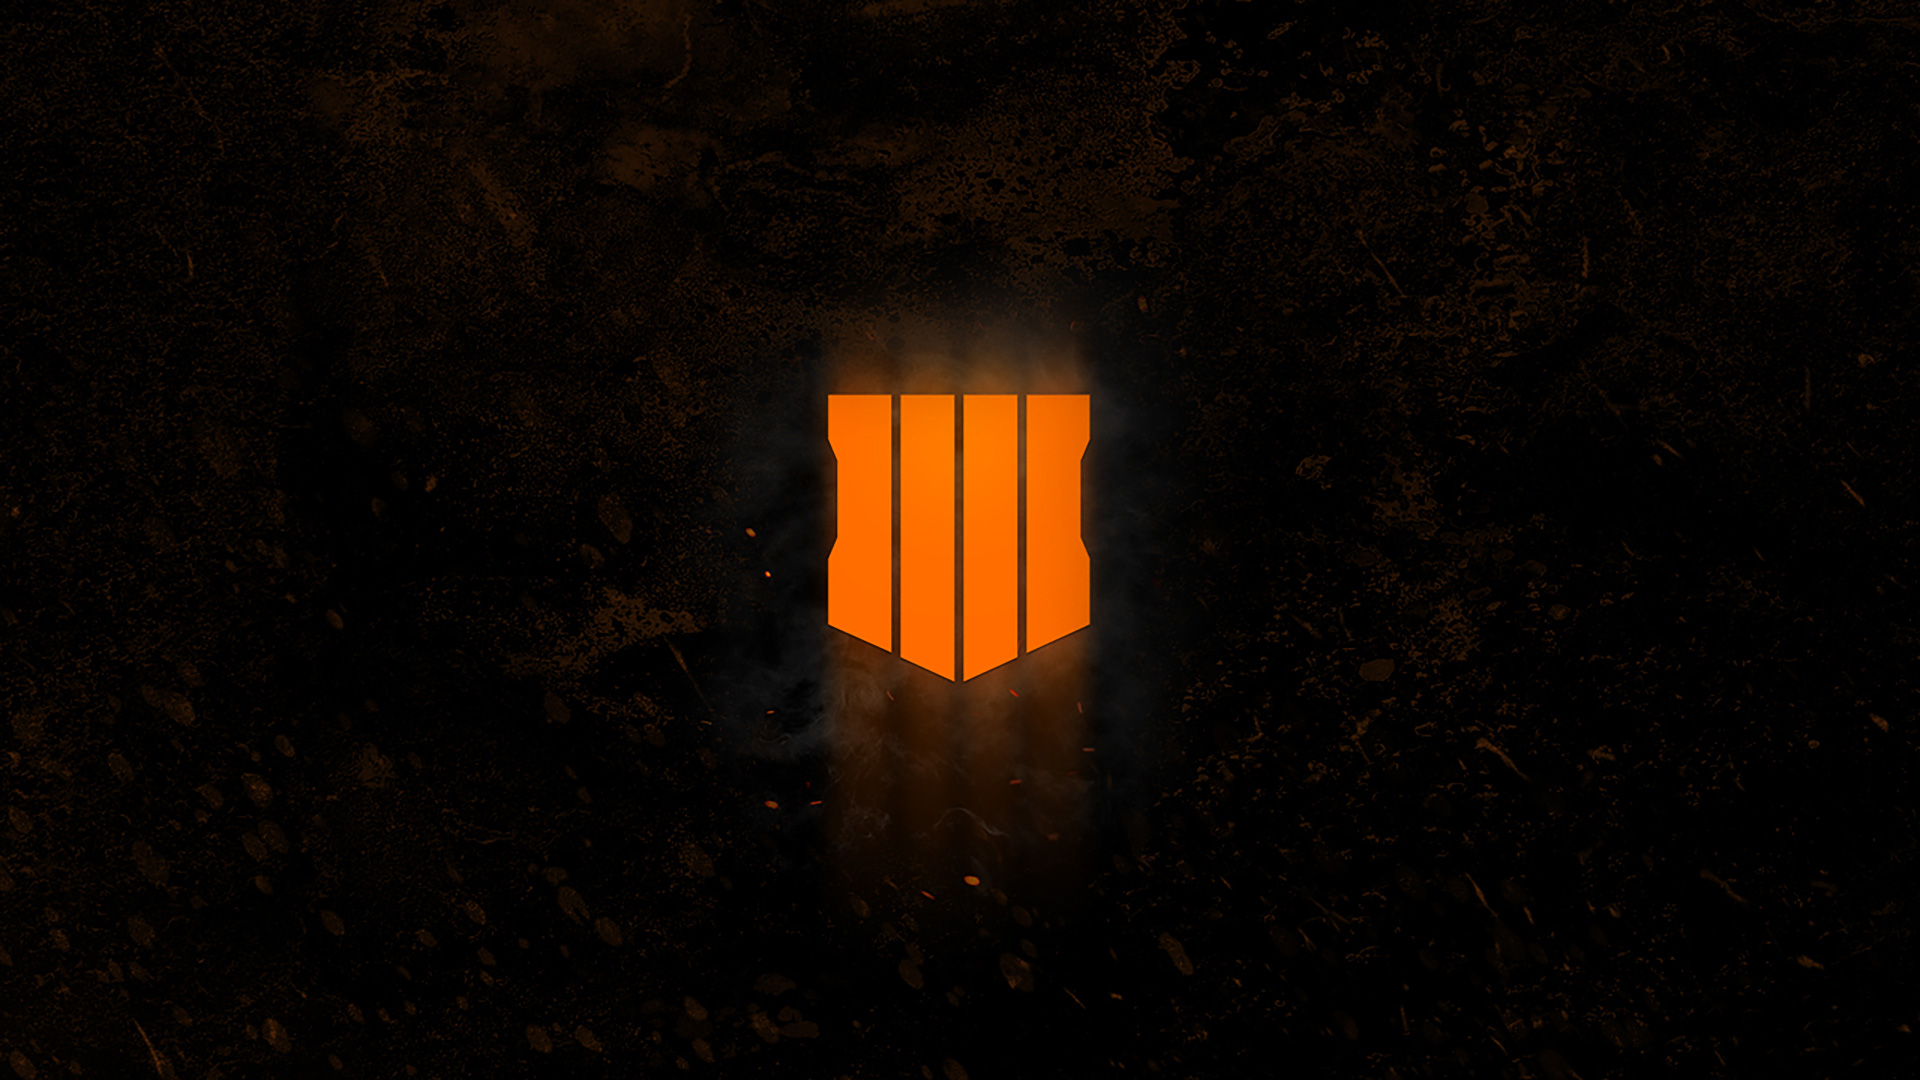 Free download Call Of Duty Black Ops 4 Logo Wallpaper 65180 1920x1080px